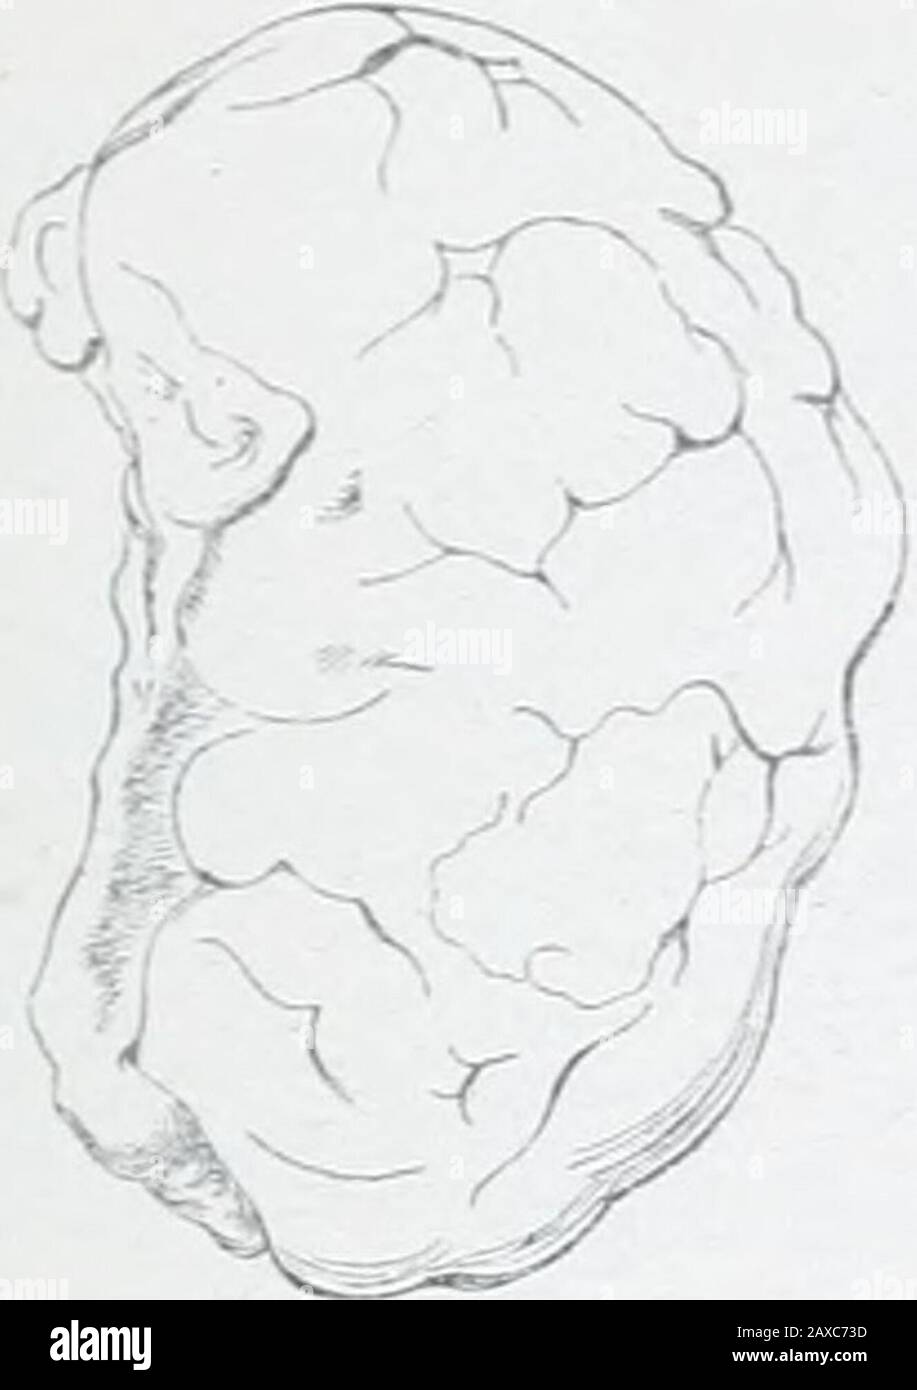 Birmingham Medical ReviewA quarterly journal of the medical sciences . lows:— There are no signs of alveolar degeneration; butthe elongated cells of the stroma are larger than innormal ovaries, and there are few vessels, the hypertrophx-of th(jse that remain, and the bundles of fibrous tissue,point to a cirrhotic change following the cxanthcmaticoophoritis. There were no morbid cysts, nor extravasationof blood ; no pathological breaking down. There weretwo Graafian vesicles, each about ixs of an inch indiameter, both close to the surface; the periphery of theovary being slightly denser than th Stock Photo